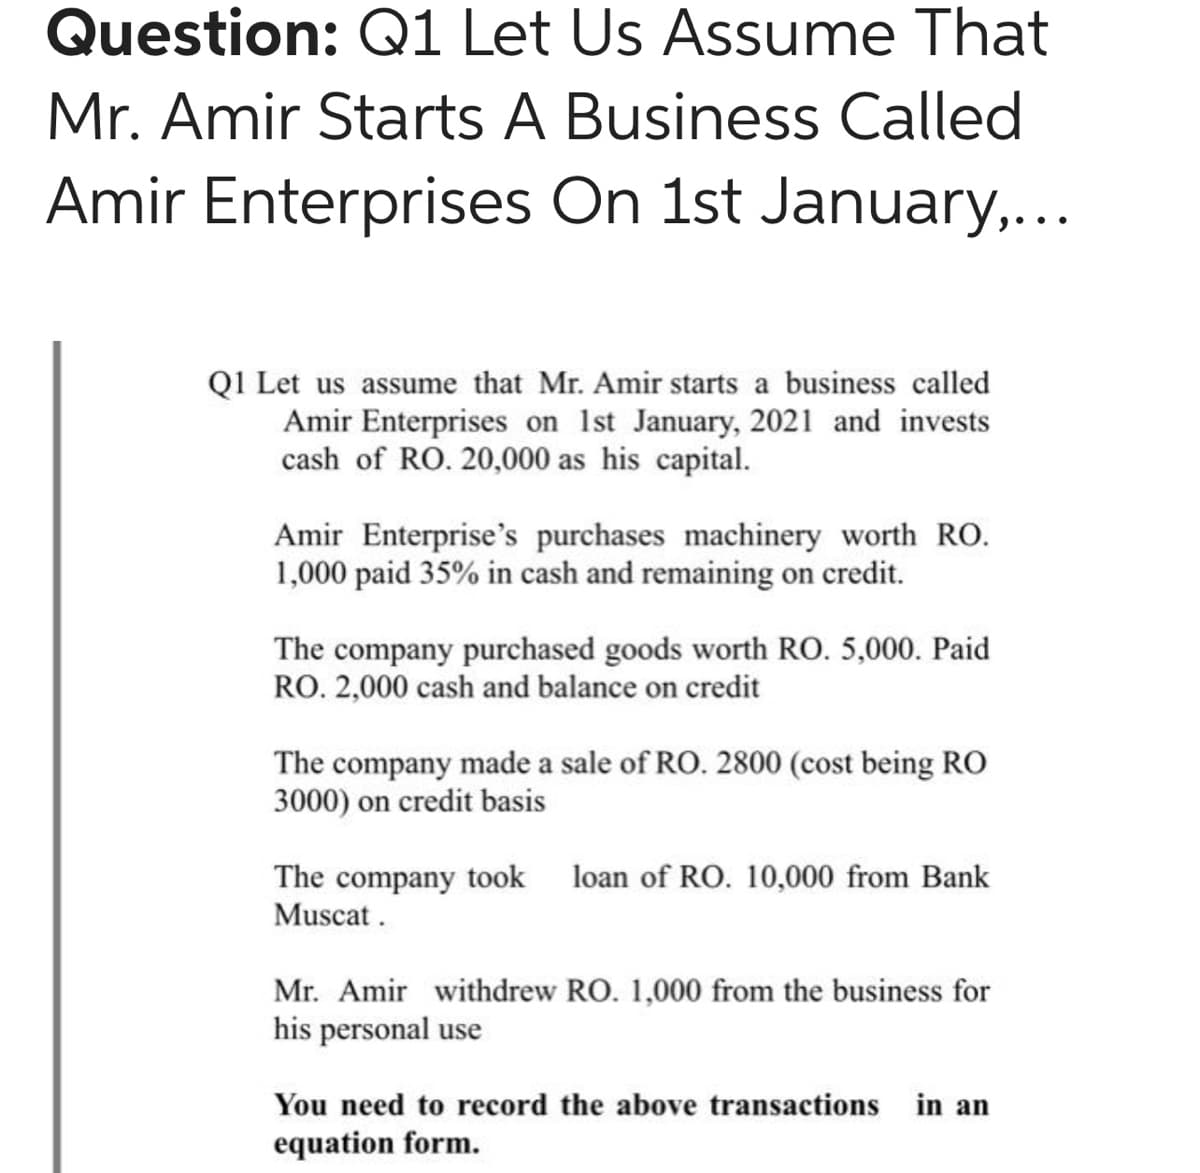 Question: Q1 Let Us Assume That
Mr. Amir Starts A Business Called
Amir Enterprises On 1st January,...
QI Let us assume that Mr. Amir starts a business called
Amir Enterprises on 1st January, 2021 and invests
cash of RO. 20,000 as his capital.
Amir Enterprise's purchases machinery worth RO.
1,000 paid 35% in cash and remaining on credit.
The company purchased goods worth RO. 5,000. Paid
RO. 2,000 cash and balance on credit
The company made a sale of RO. 2800 (cost being RO
3000) on credit basis
The company took loan of RO. 10,000 from Bank
Muscat.
Mr. Amir withdrew RO. 1,000 from the business for
his personal use
You need to record the above transactions in an
equation form.
